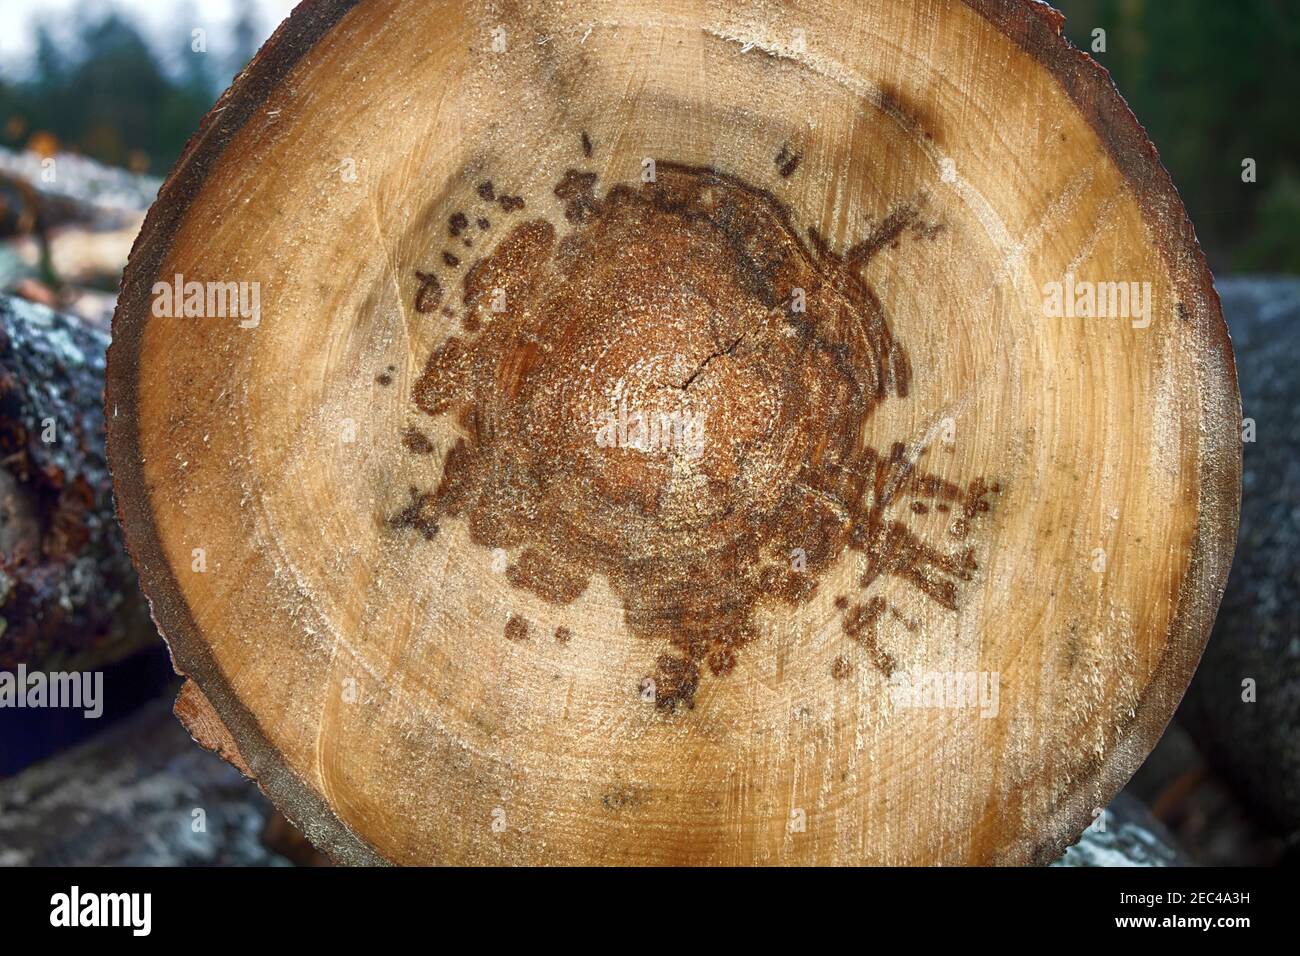 Aspen pith stock and heartwood rot (stem rot) - doted tree in forest products industry. Phytopathologies and tinder mushroom Phellinus tremulae negati Stock Photo